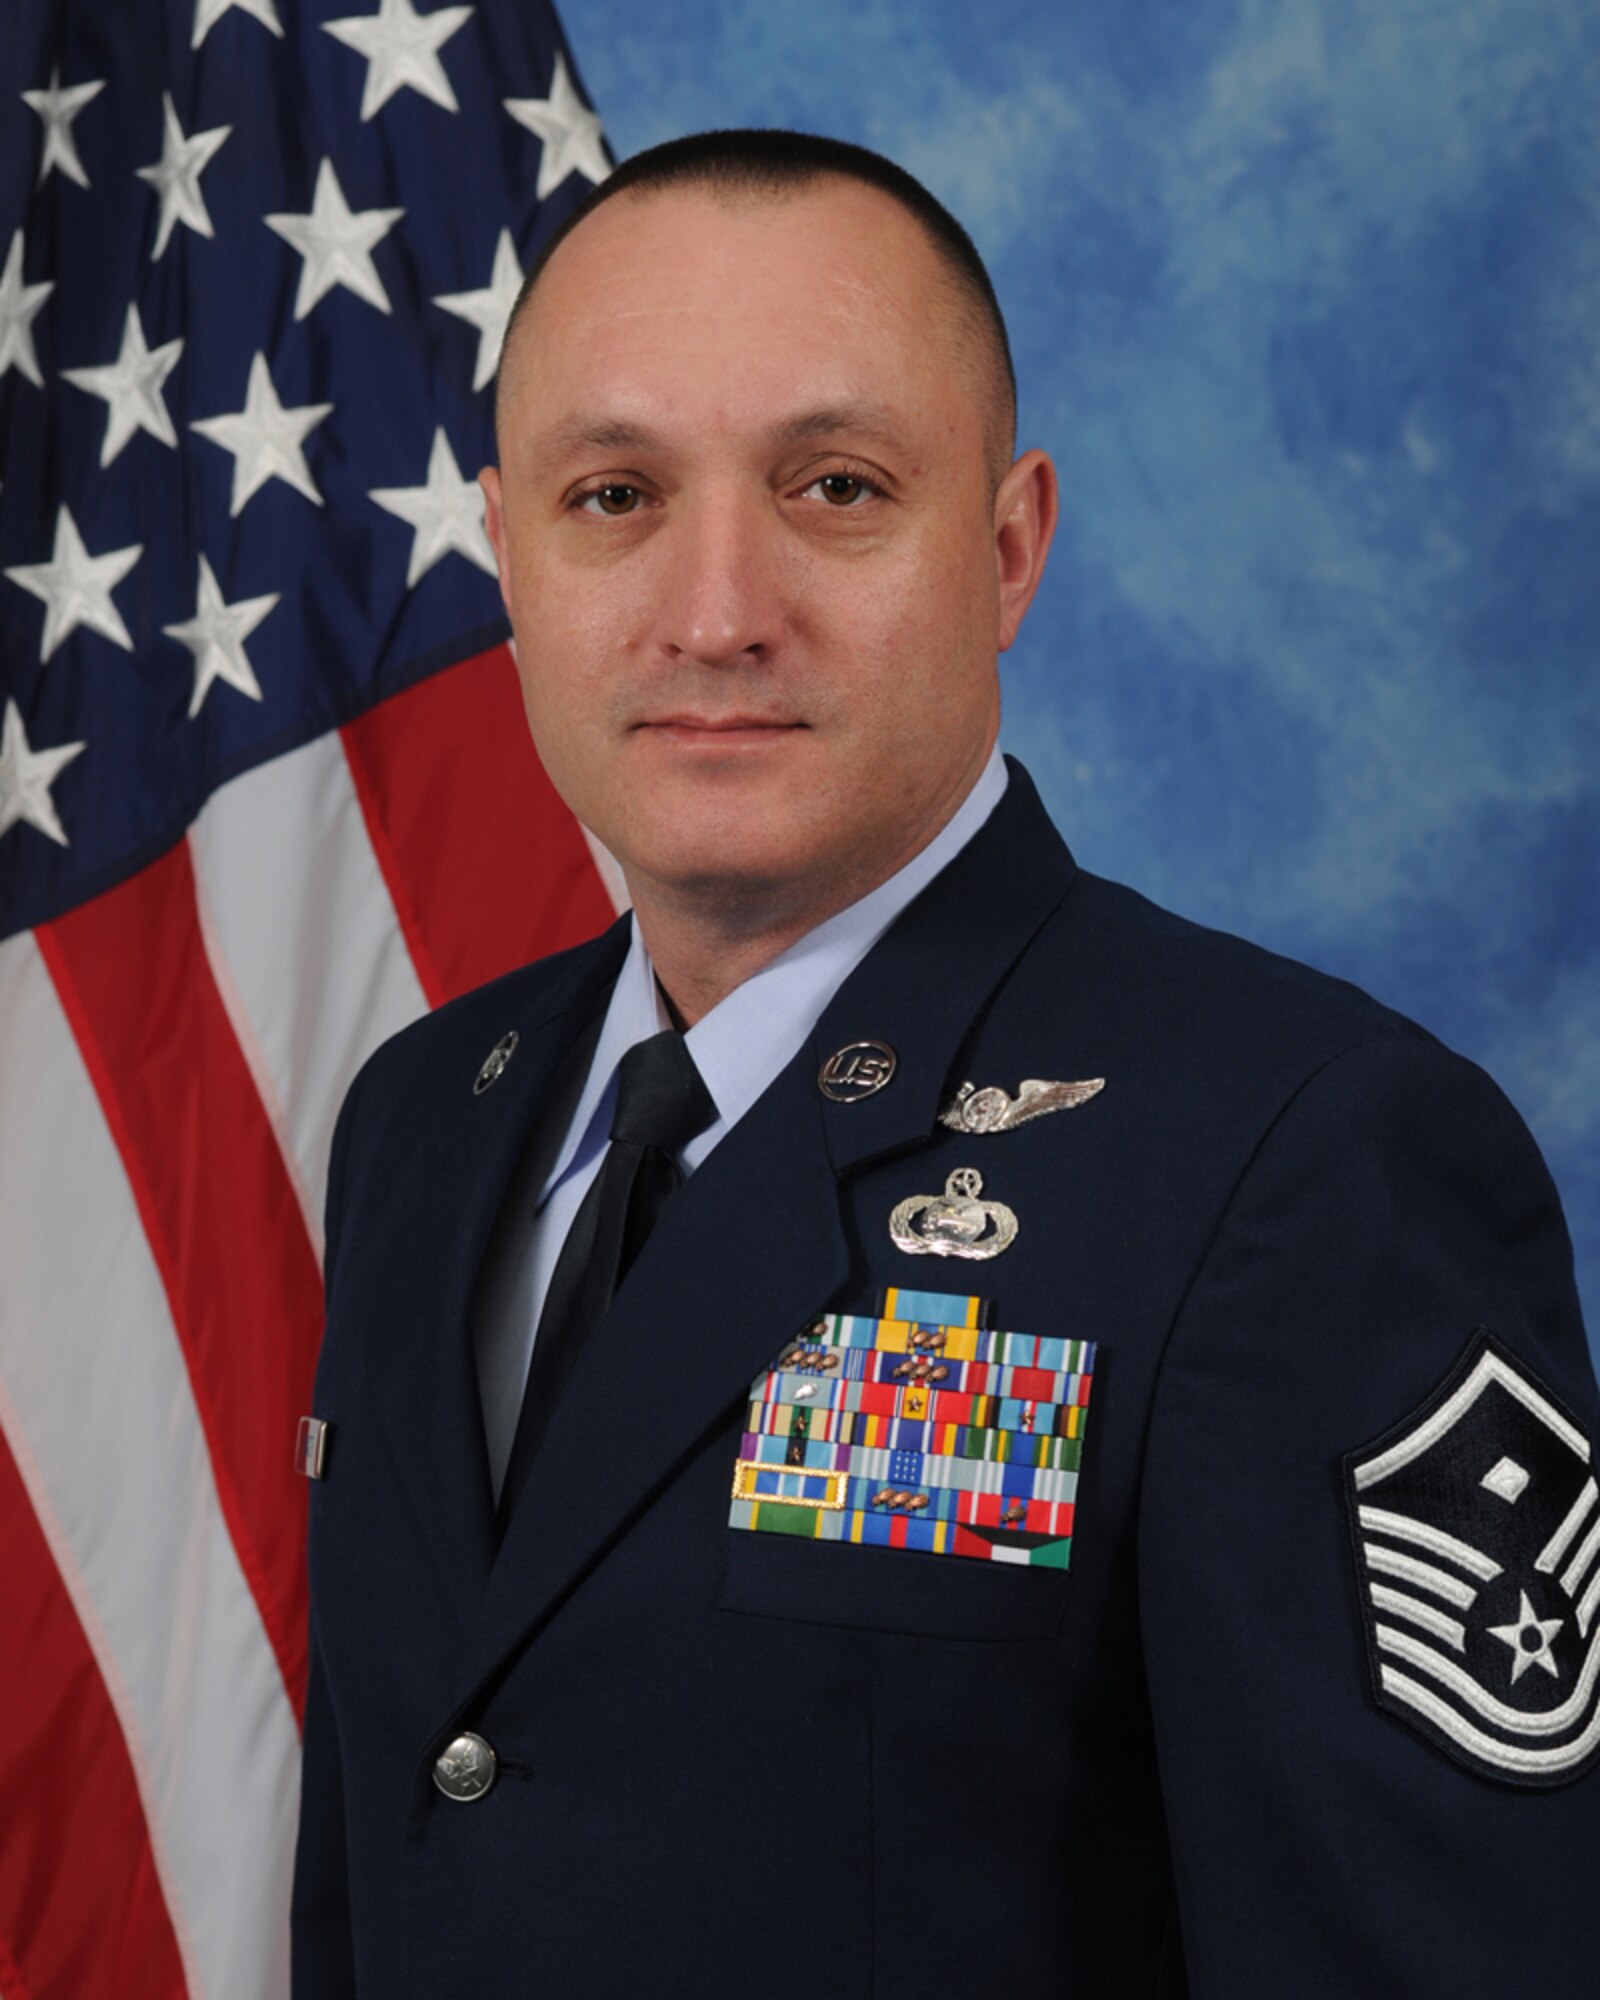 Master Sgt. Jeffery Baxter, 17th Force Support Squadron is the 2009 First Sergeant of the year at 17th Training Wing, Goodfellow AFB, Texas. The annual awards program recognizes both civilians and members in 16 categories of the Air Force, Army, Navy and Marines who are assigned to the wing, for their significant contributions to the 17 TRW, the community and mission. (U.S. Air Force photo/ Lou Czarnecki)